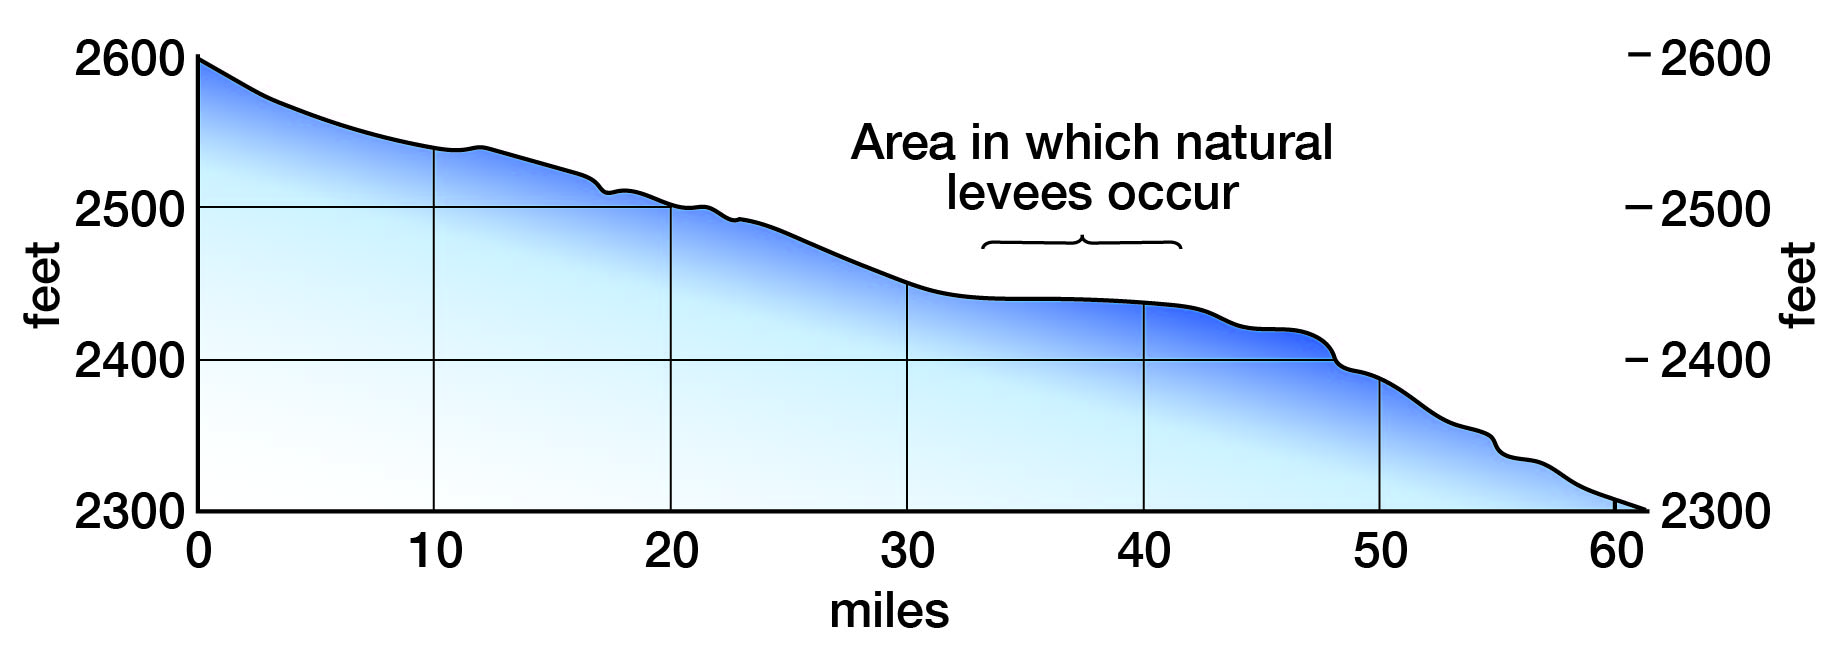 Elevation ranges from 2600 in north to 2300 in south-central